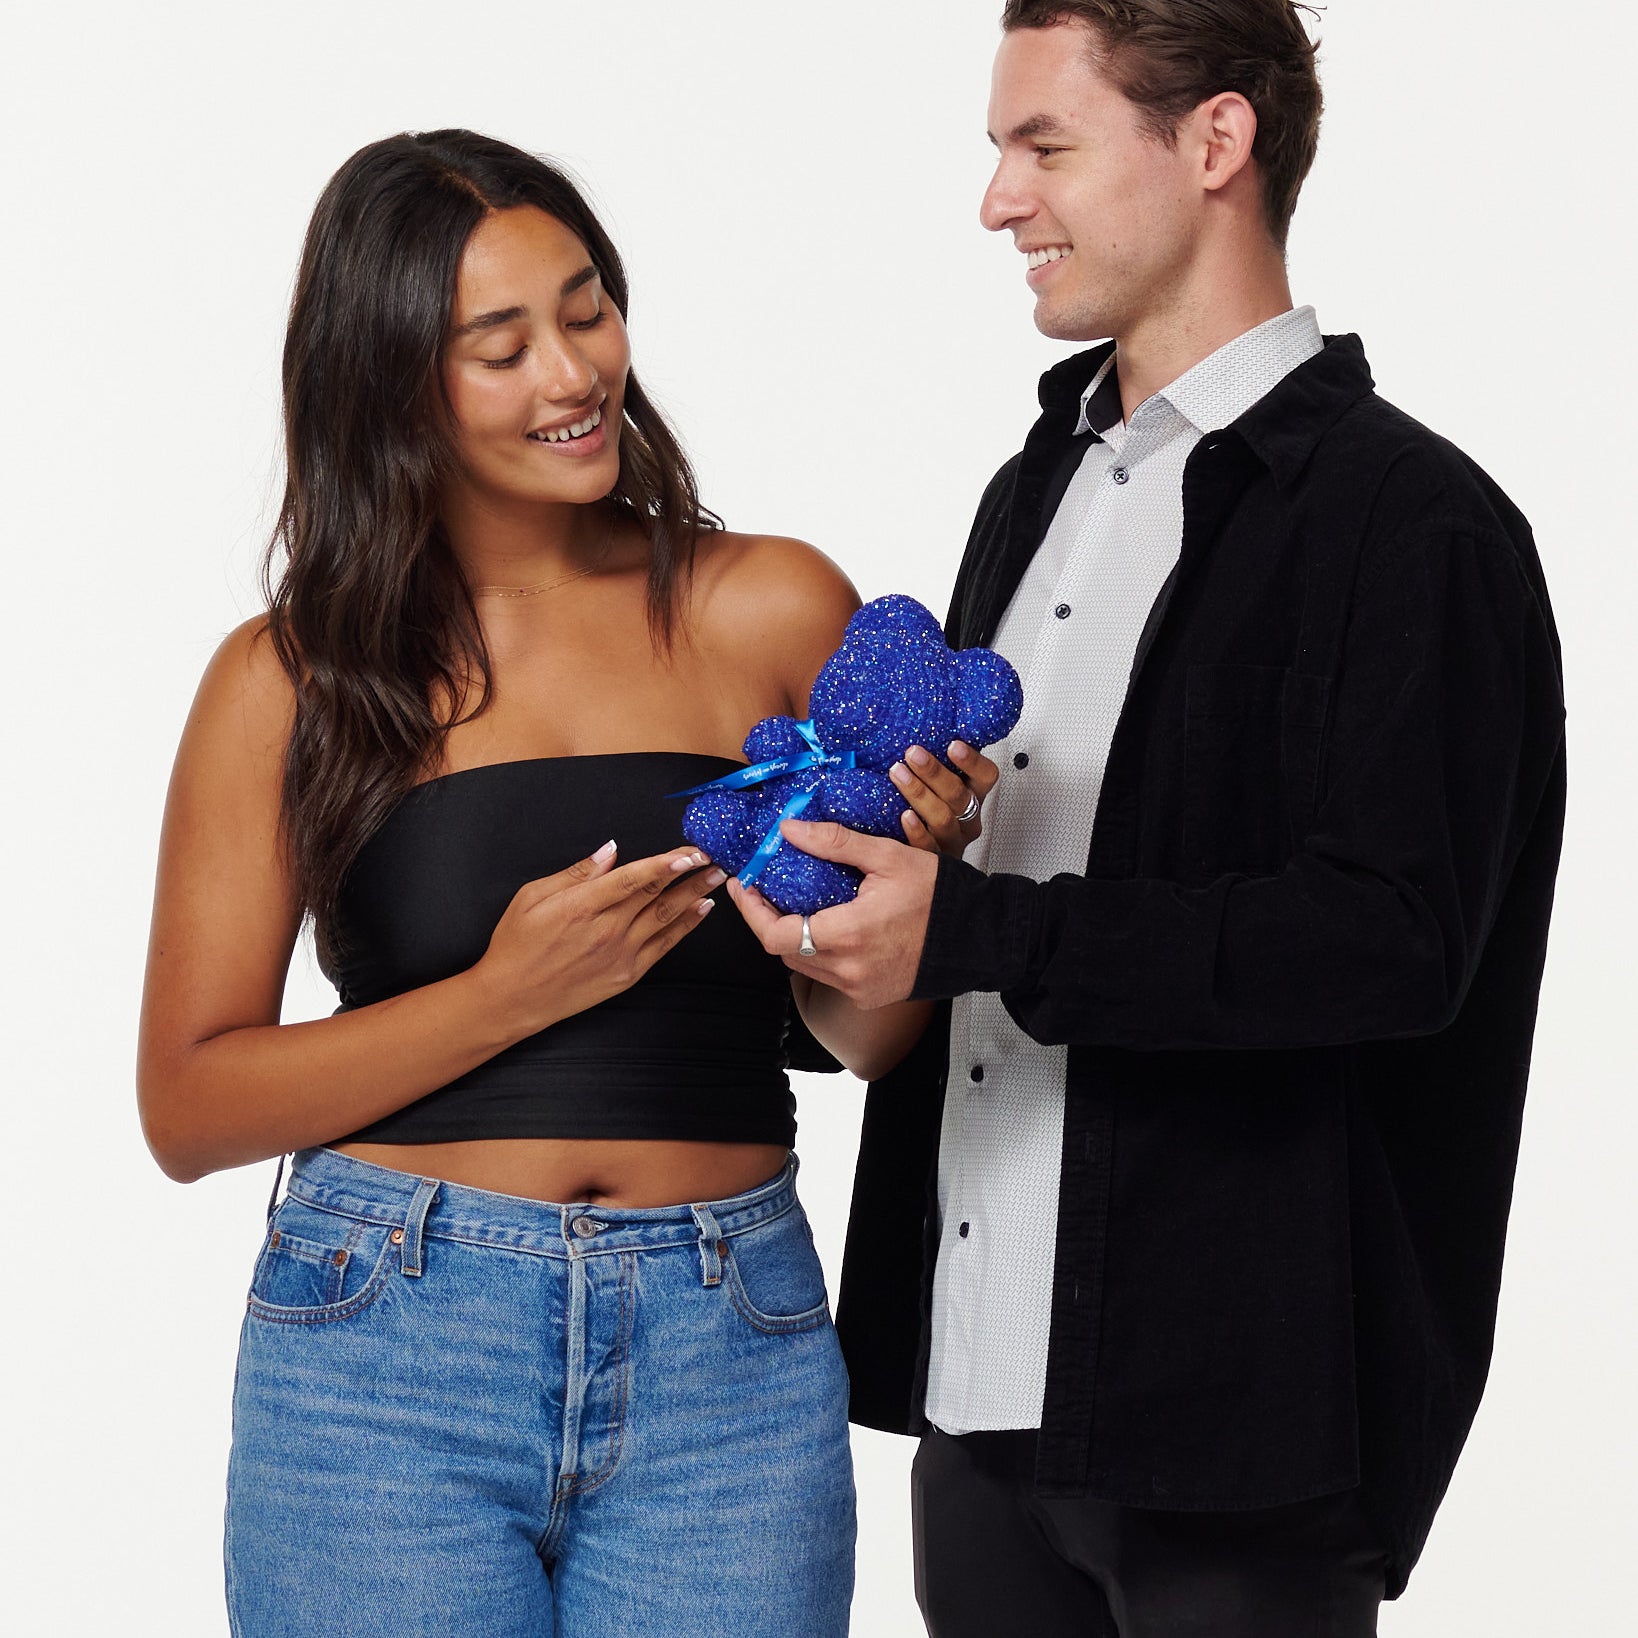 A woman in a black cropped top and blue jeans admires a blue, sparkly teddy bear with a bright blue ribbon, smiling at it. A man in a black jacket and white shirt stands beside her, looking at the teddy bear and smiling, his hands placed on the bear, as they share a moment of appreciation.